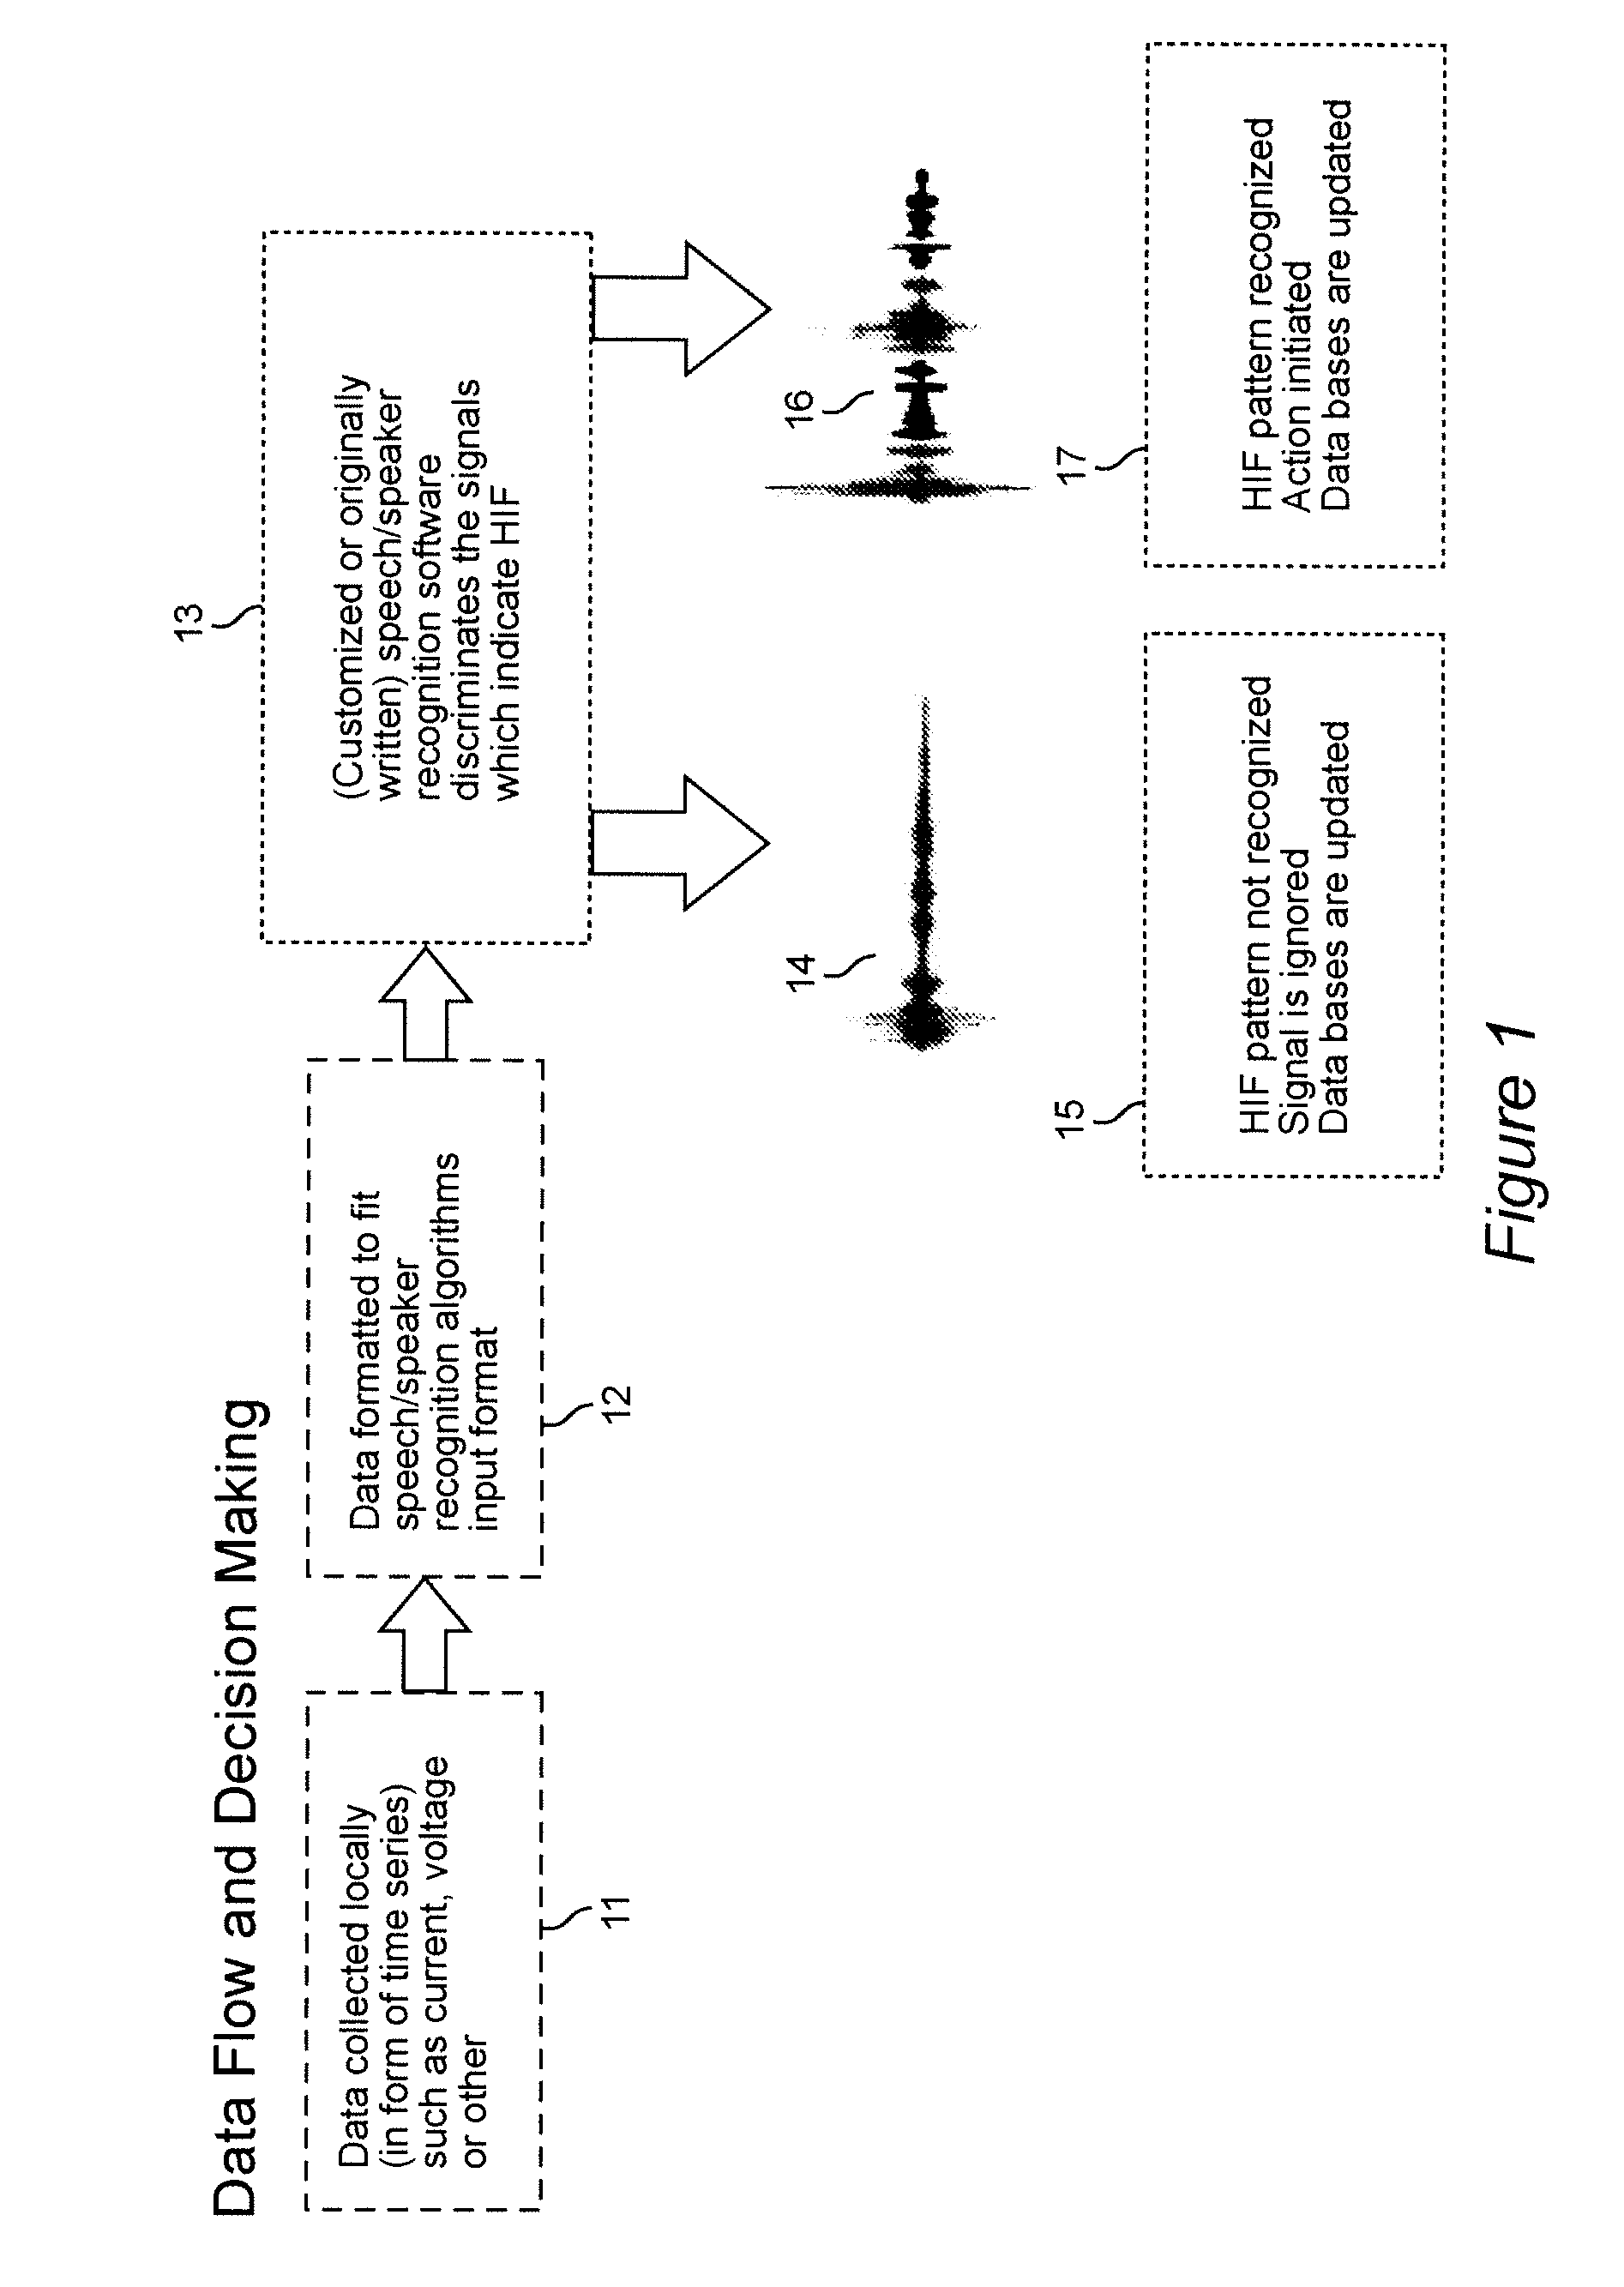 Application of Speech and Speaker Recognition Tools to Fault Detection in Electrical Circuits